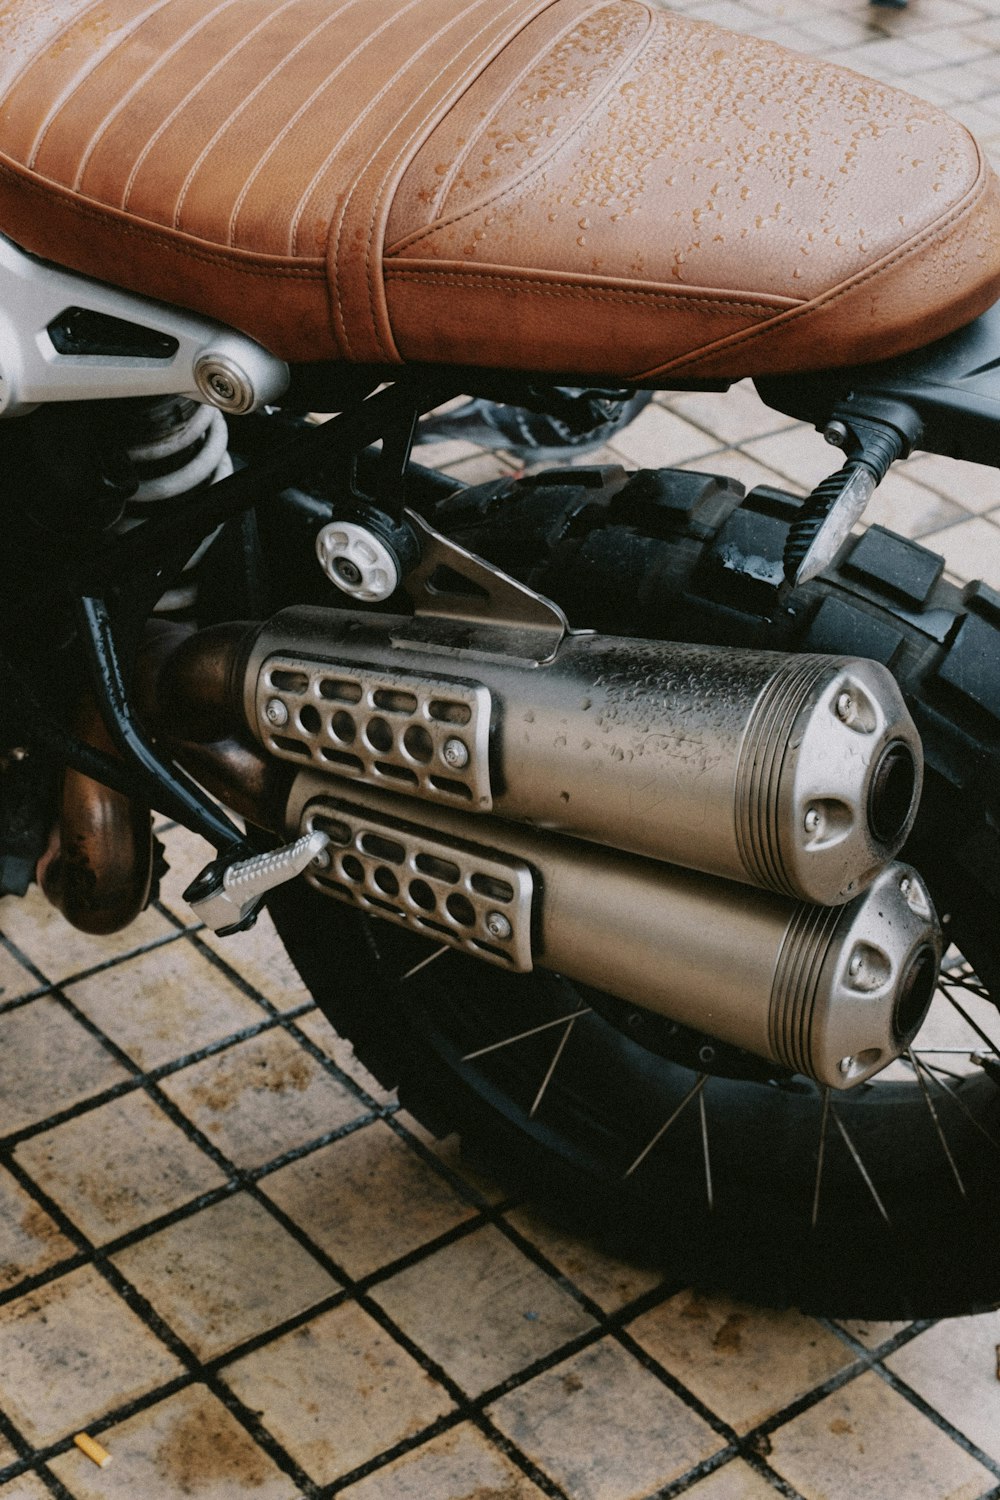 a close up of a motorcycle with a leather seat